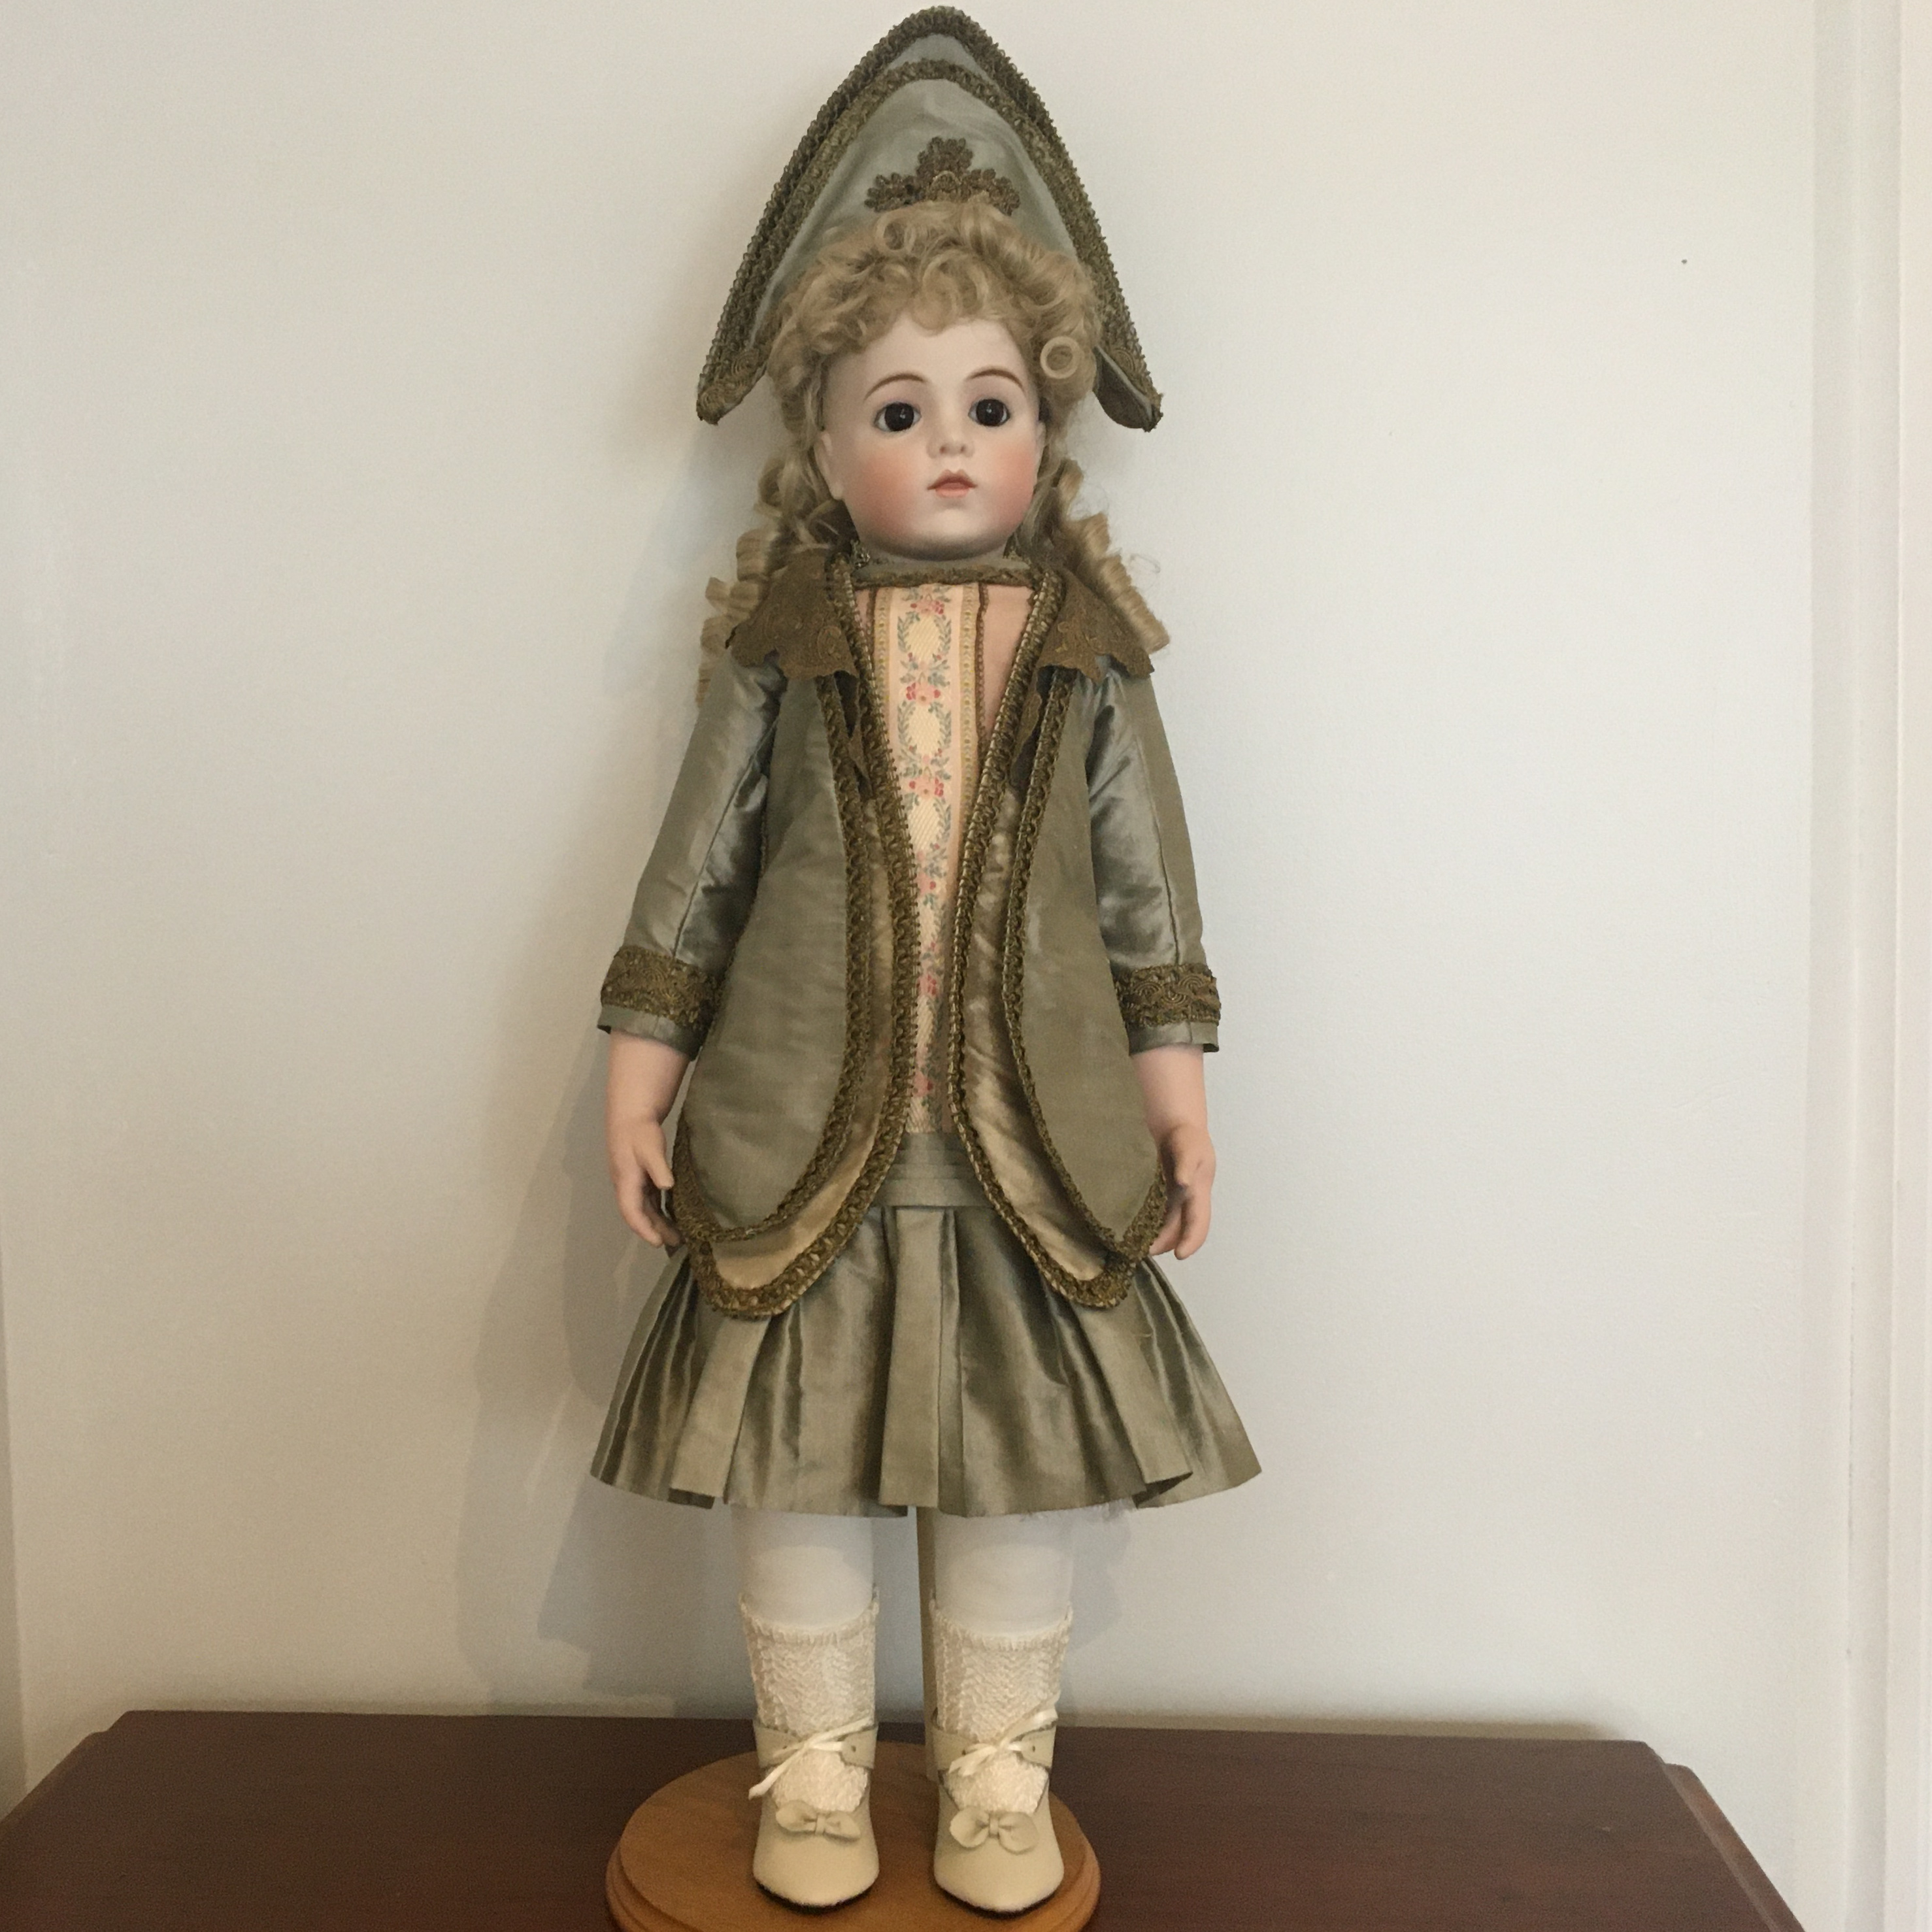 29-inch reproduction Bru doll in elaborate olive green dress and matching hat designed by Kristin Thor, front view